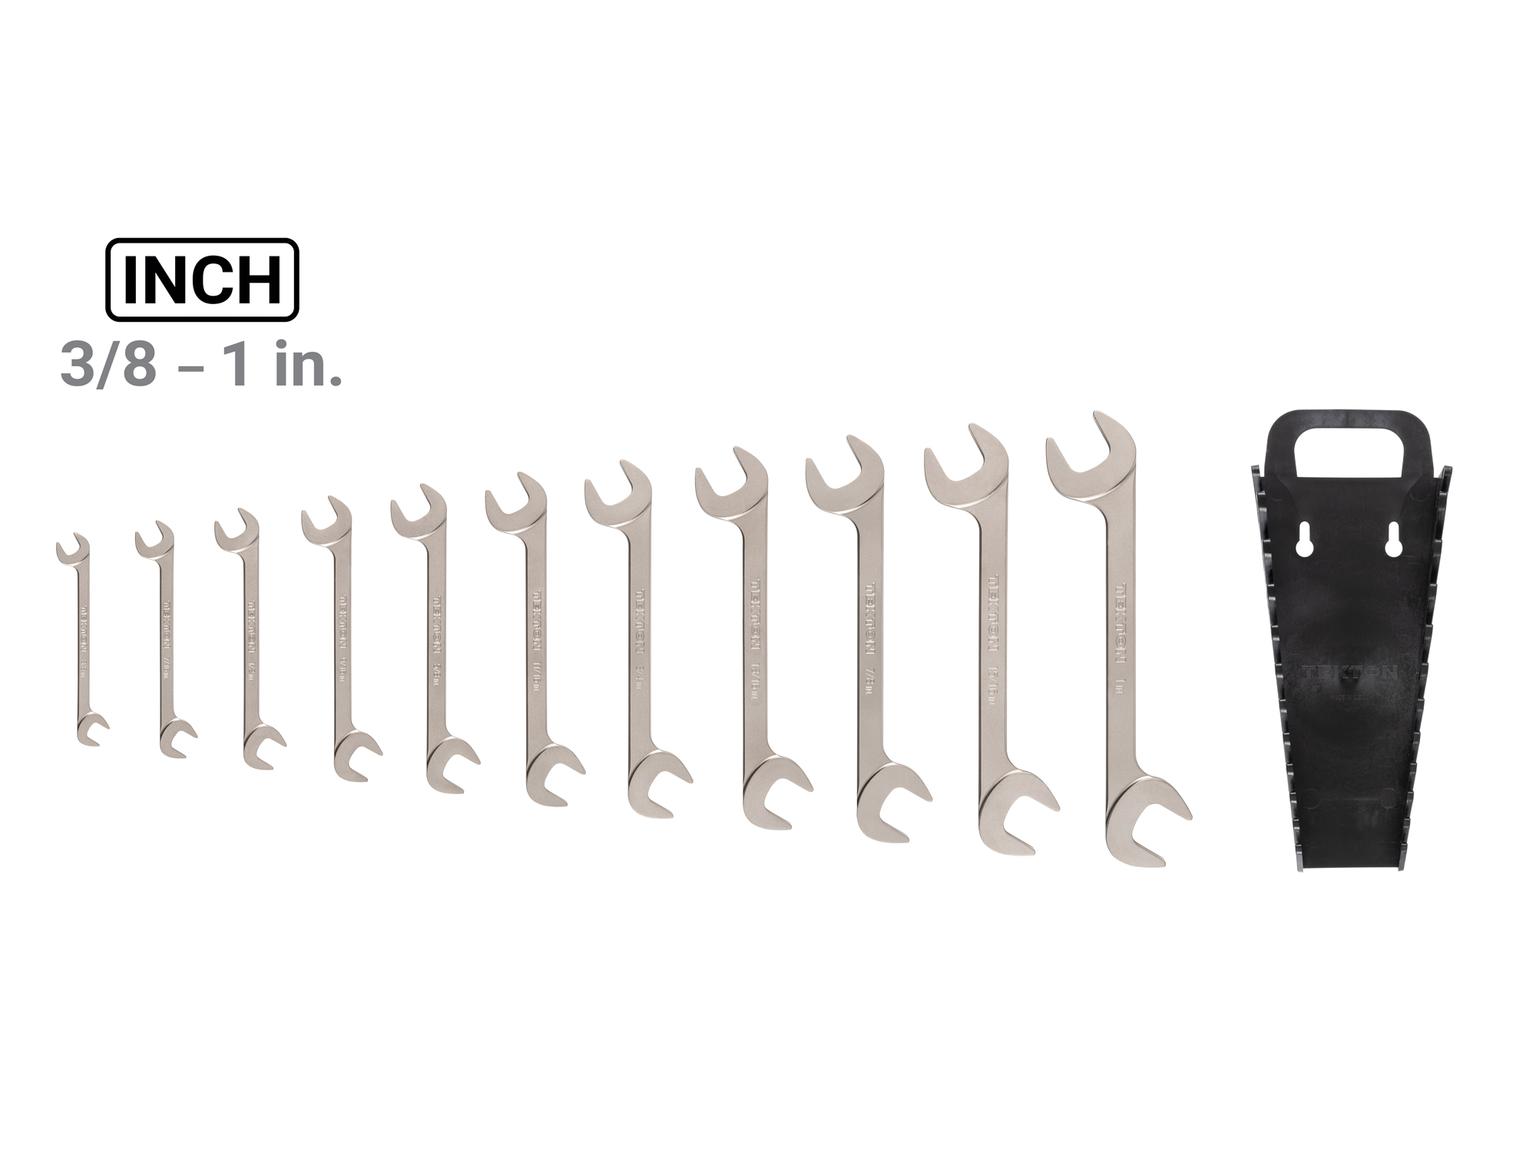 TEKTON WAE91204-T Angle Head Open End Wrench Set with Holder, 11-Piece (3/8-1 in.)